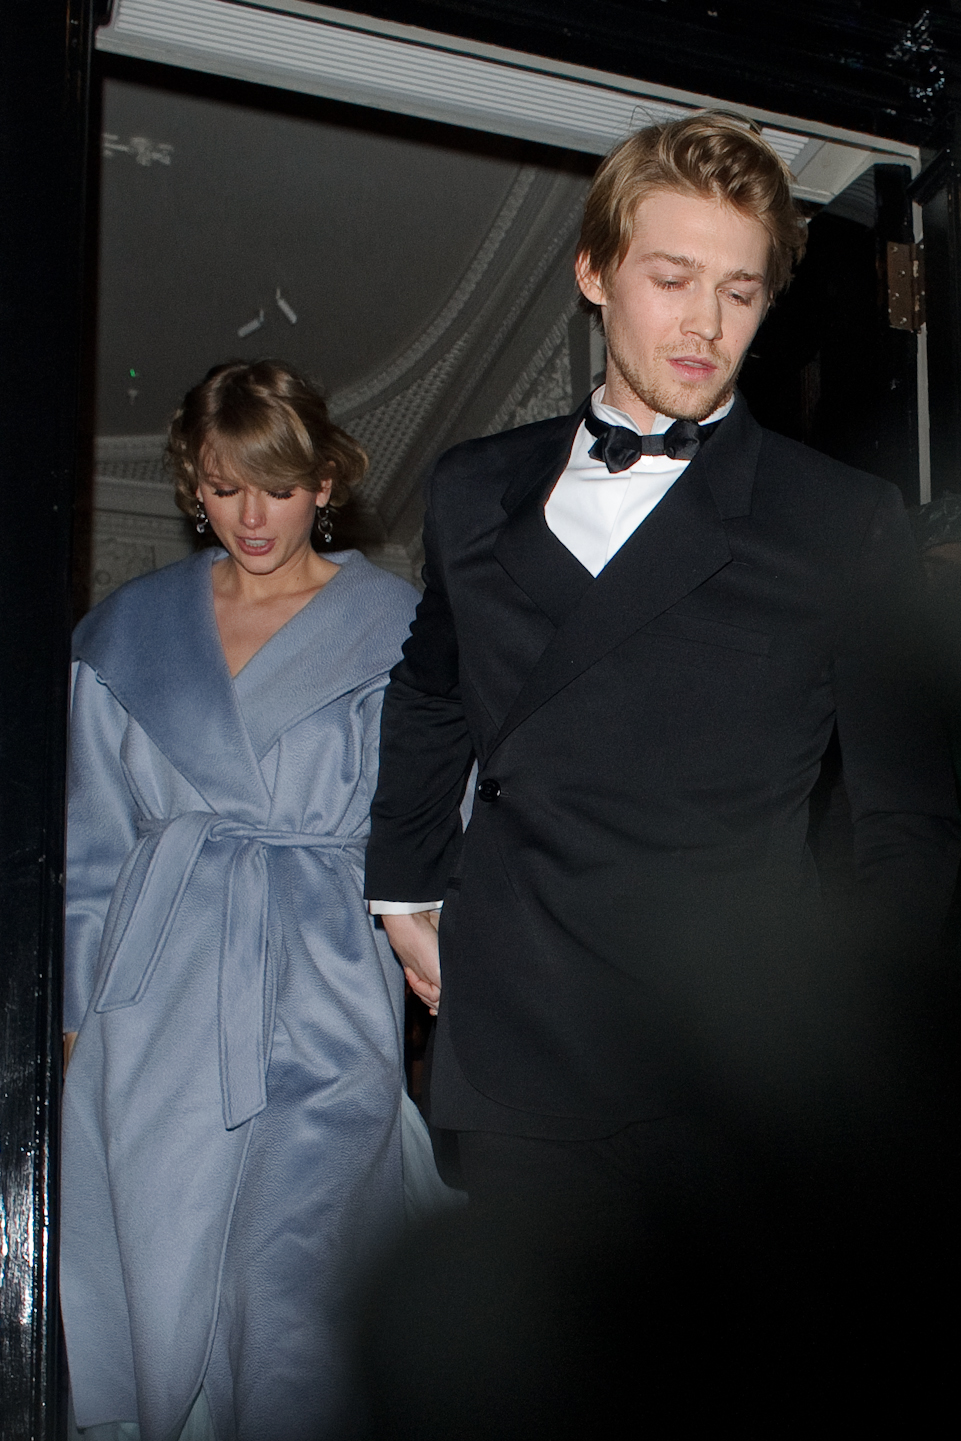 Taylor Swift and Joe Alwyn seen attending the Vogue BAFTA party at Annabel's club in Mayfair on February 10, 2019 in London, England. 